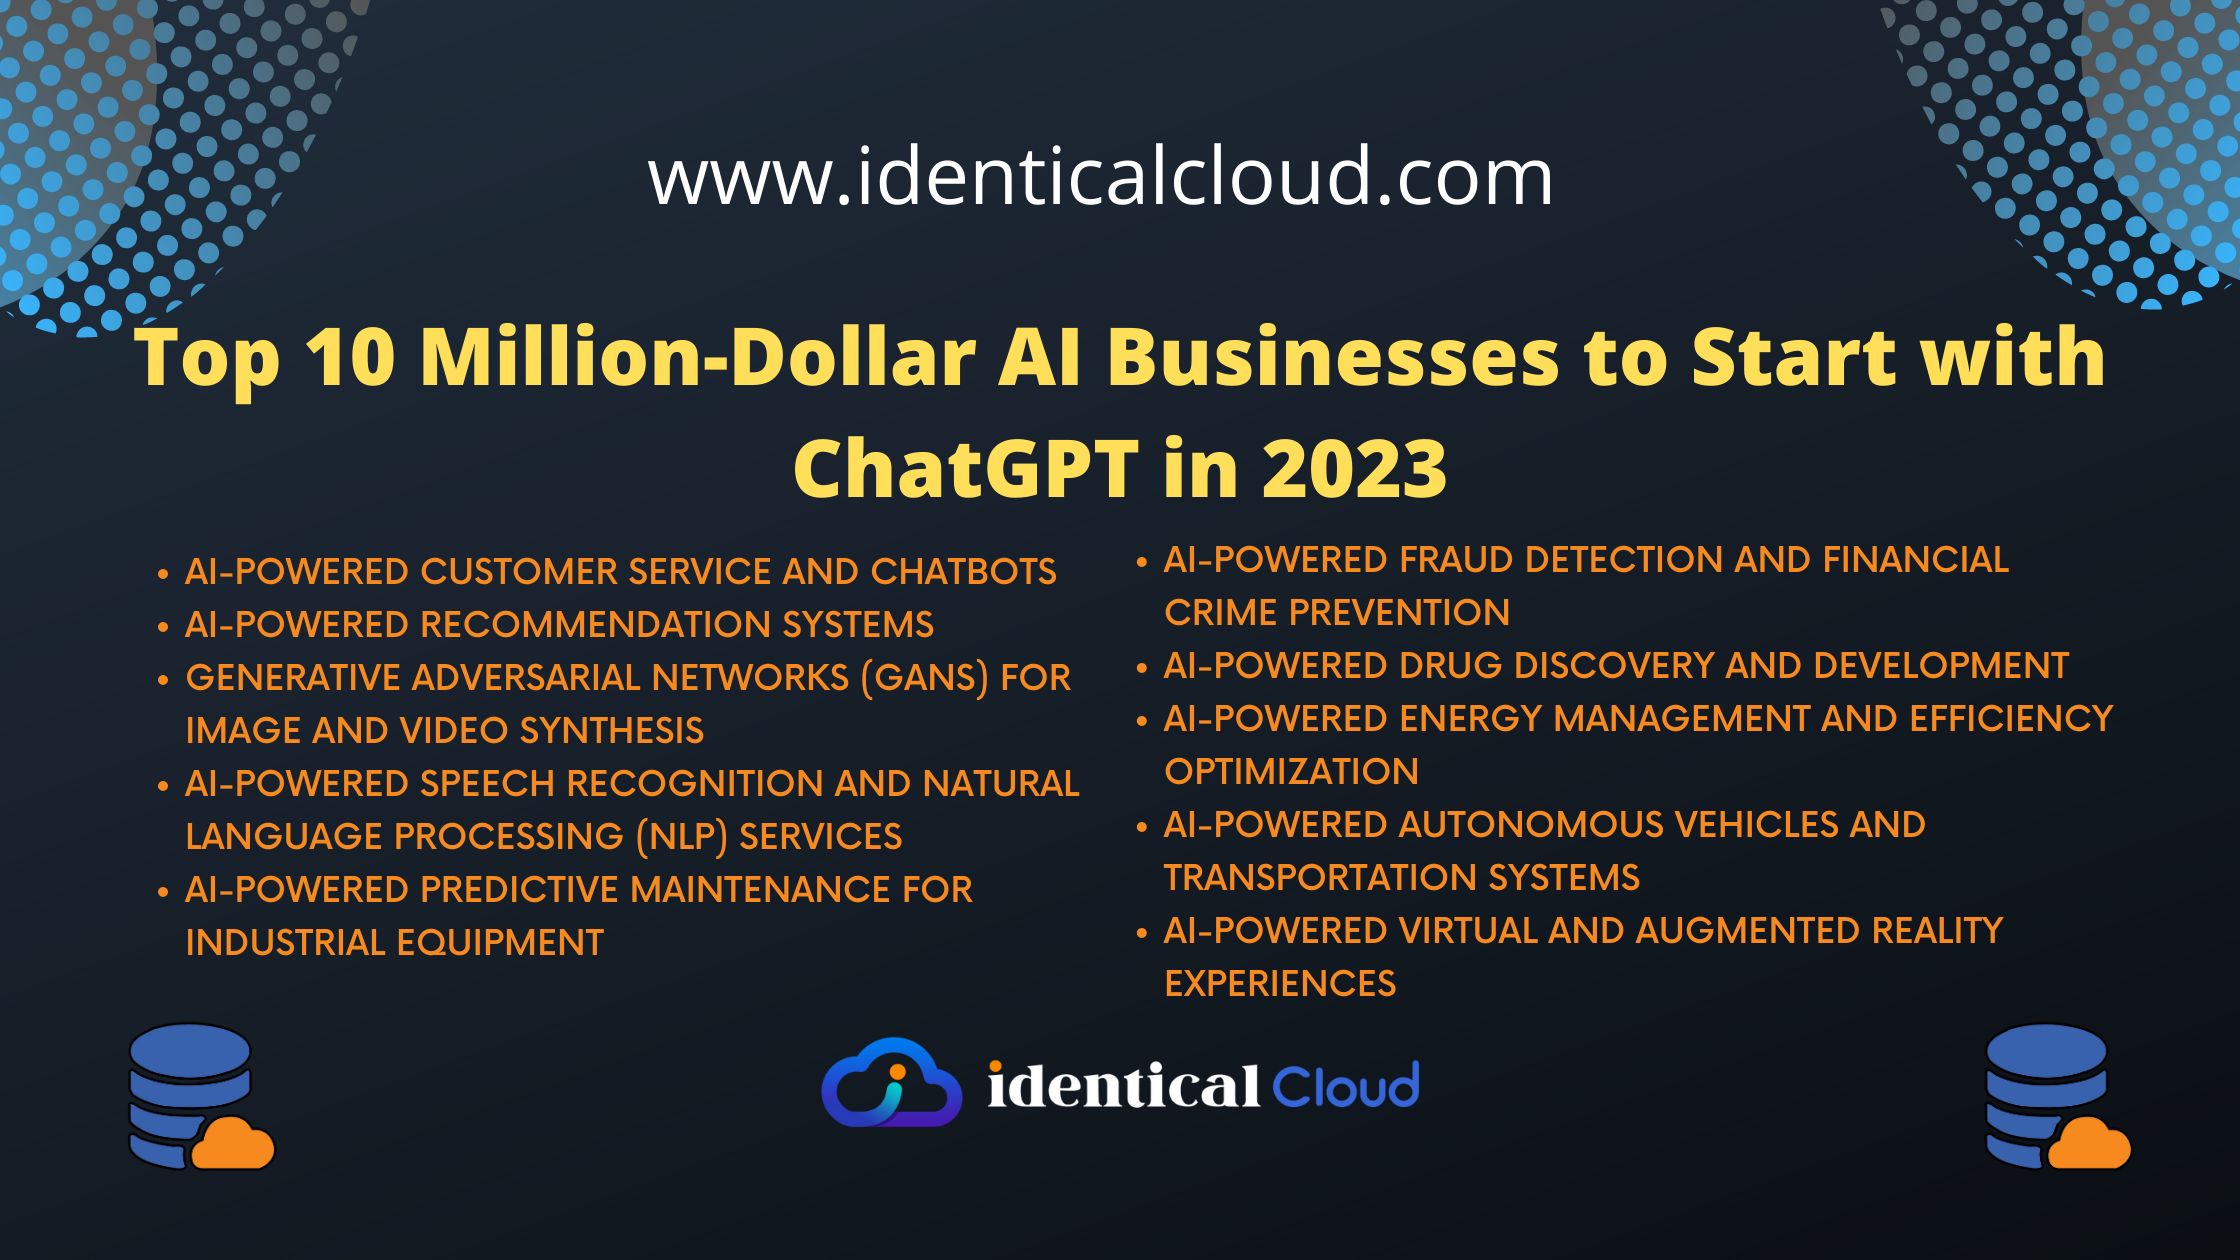 Top 10 Million-Dollar AI Businesses to Start with ChatGPT in 2023 - identicalcloud.com